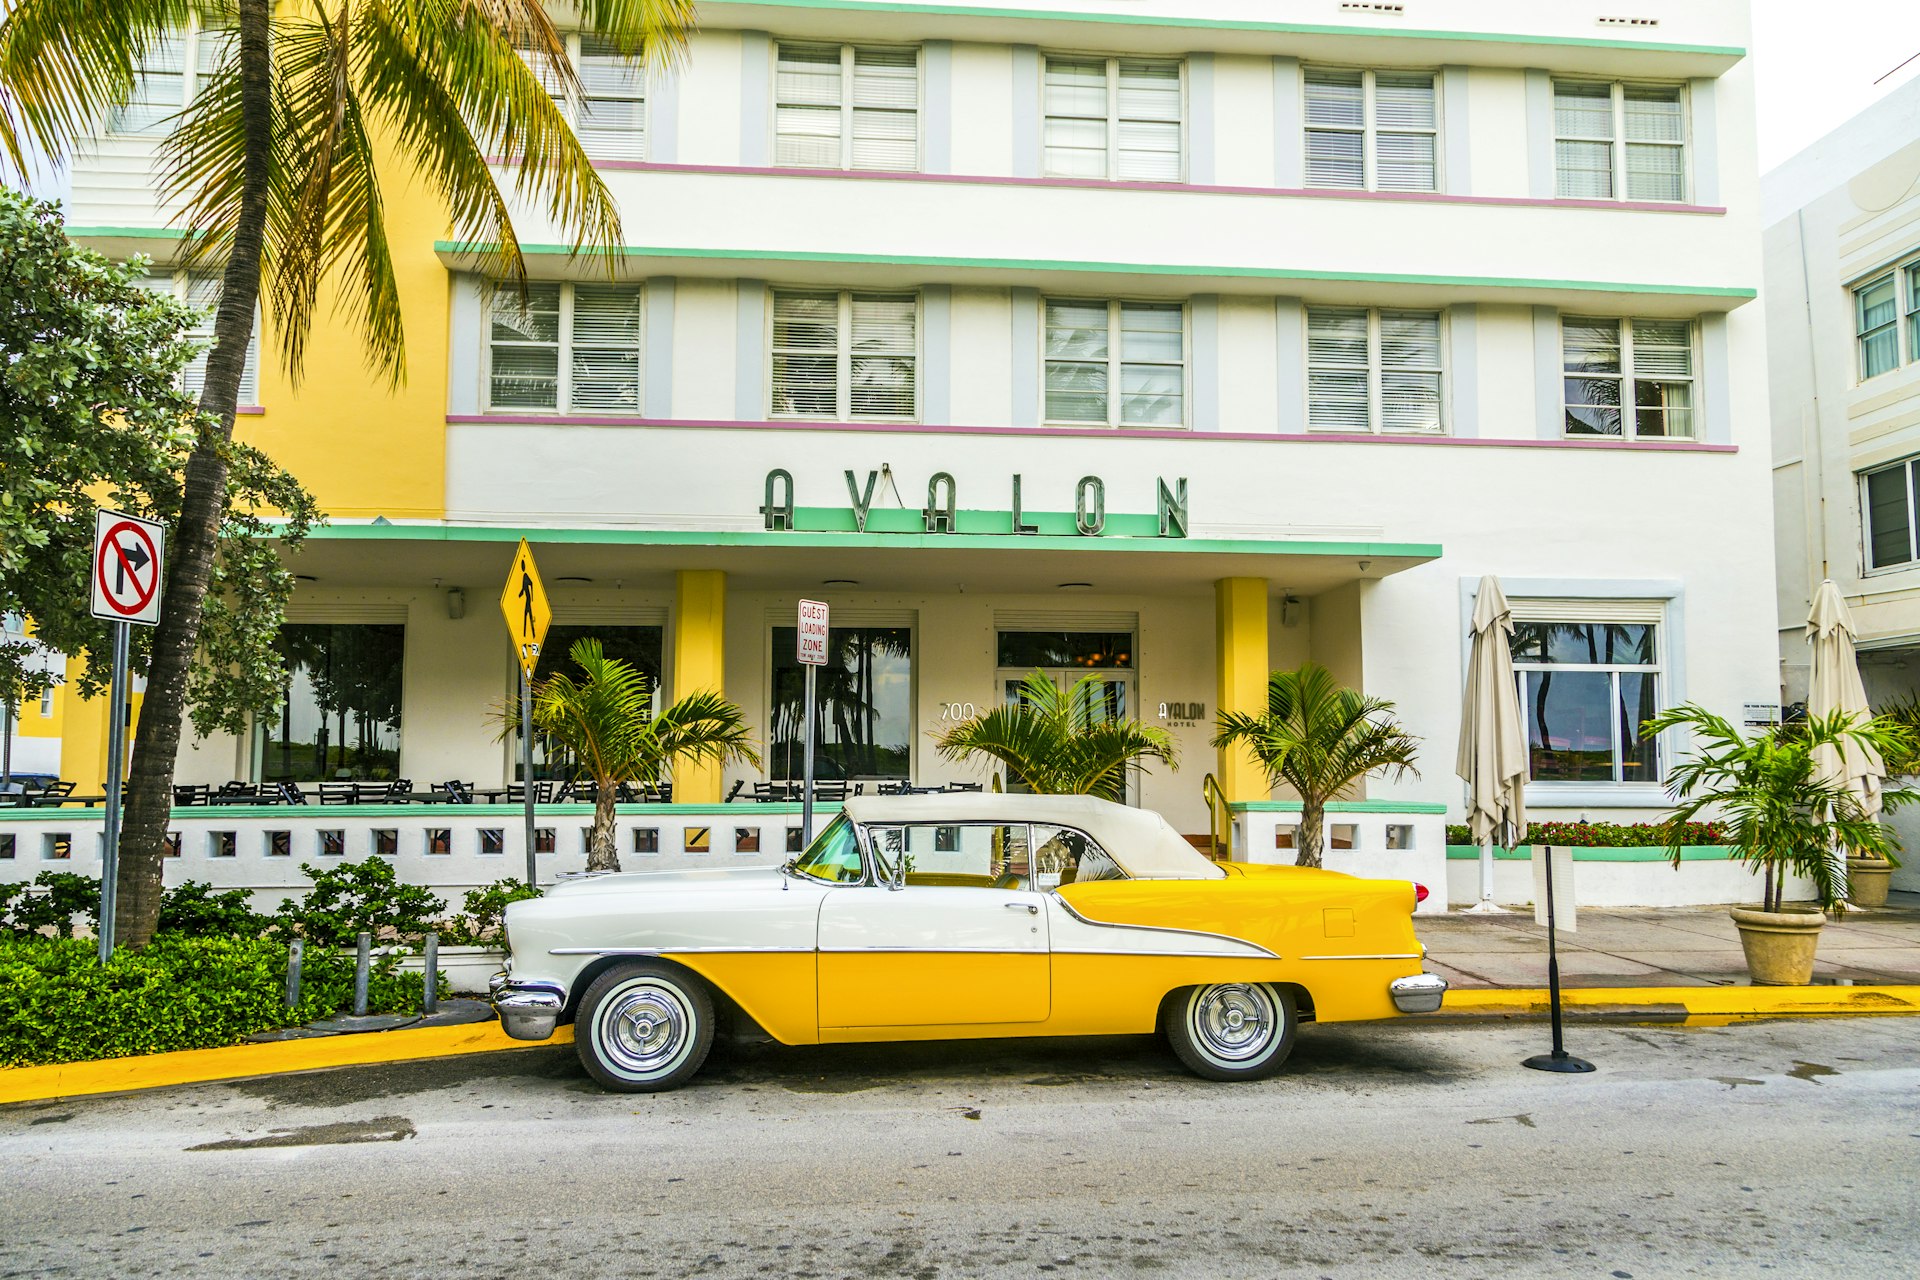 Classic car with chrome radiator grill parks in front of the art deco restaurant and Hotel Avalon in Miami Beach, Florida